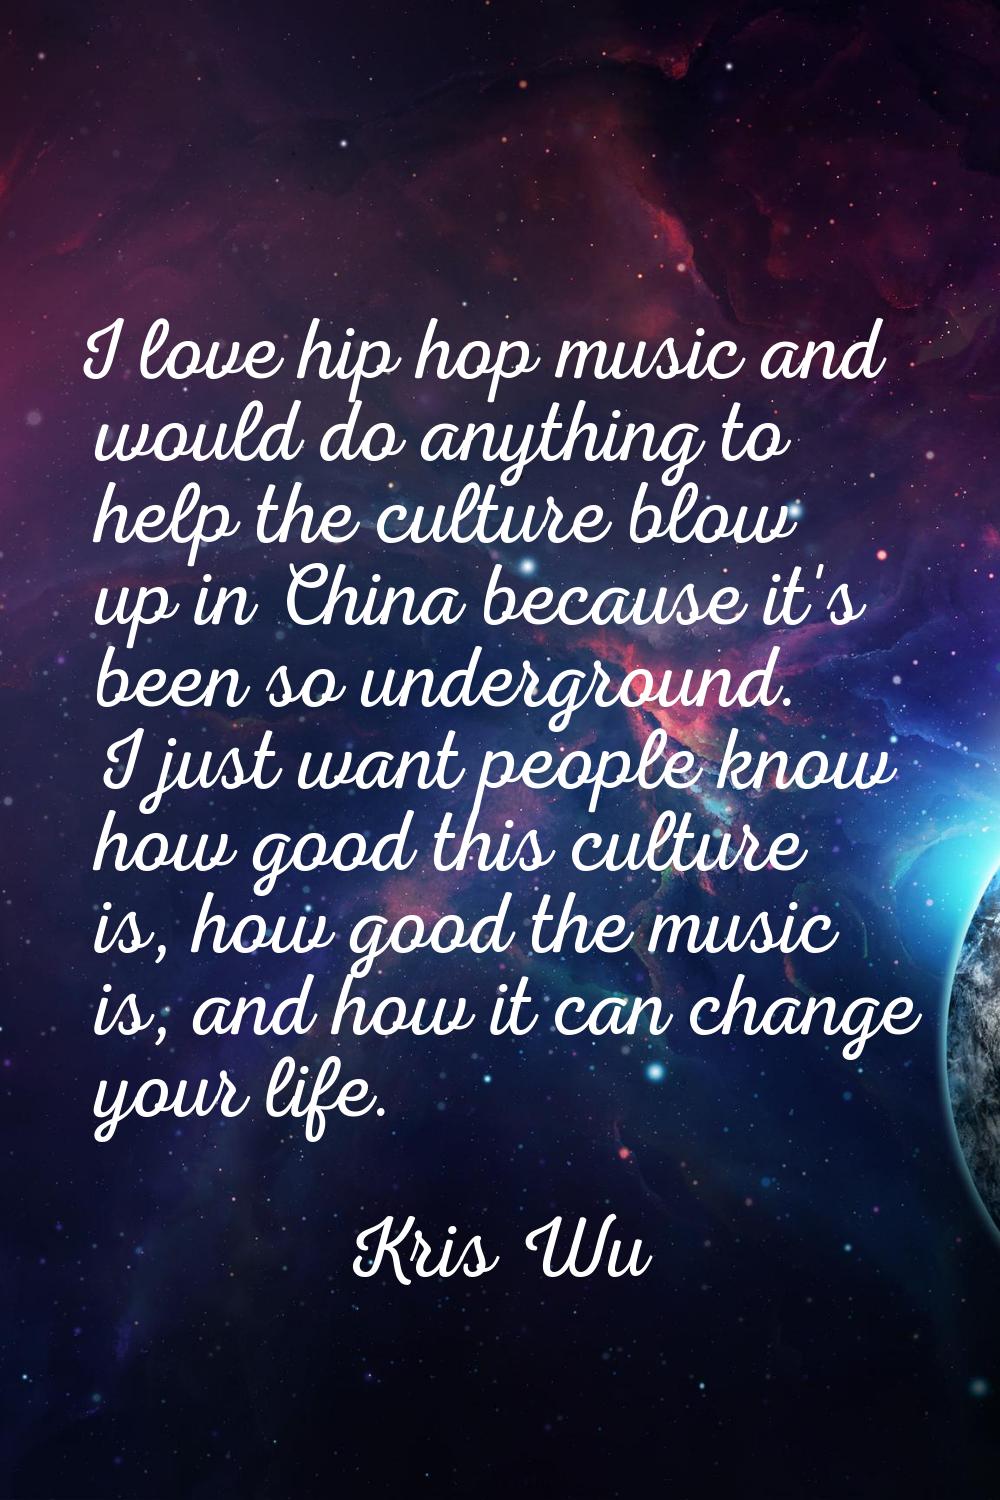 I love hip hop music and would do anything to help the culture blow up in China because it's been s